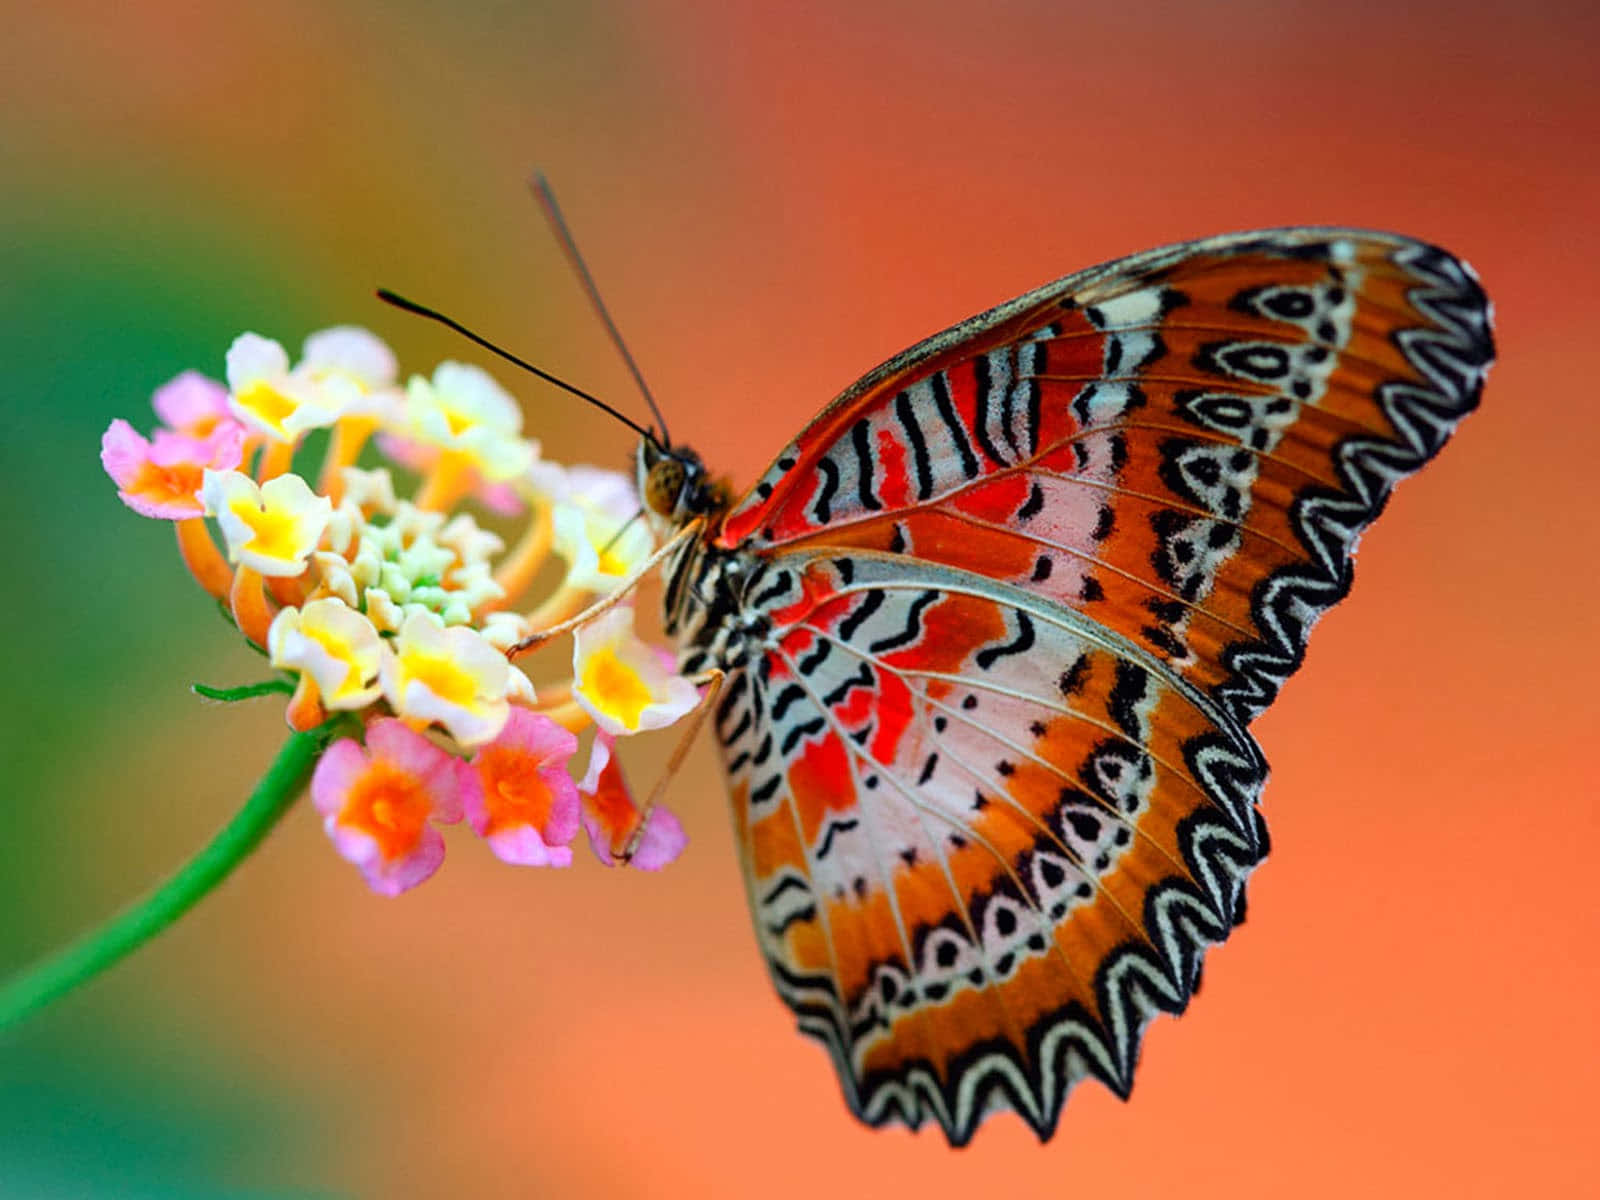 Image   "A Close Up of a Beautiful Monarch Butterfly" Wallpaper